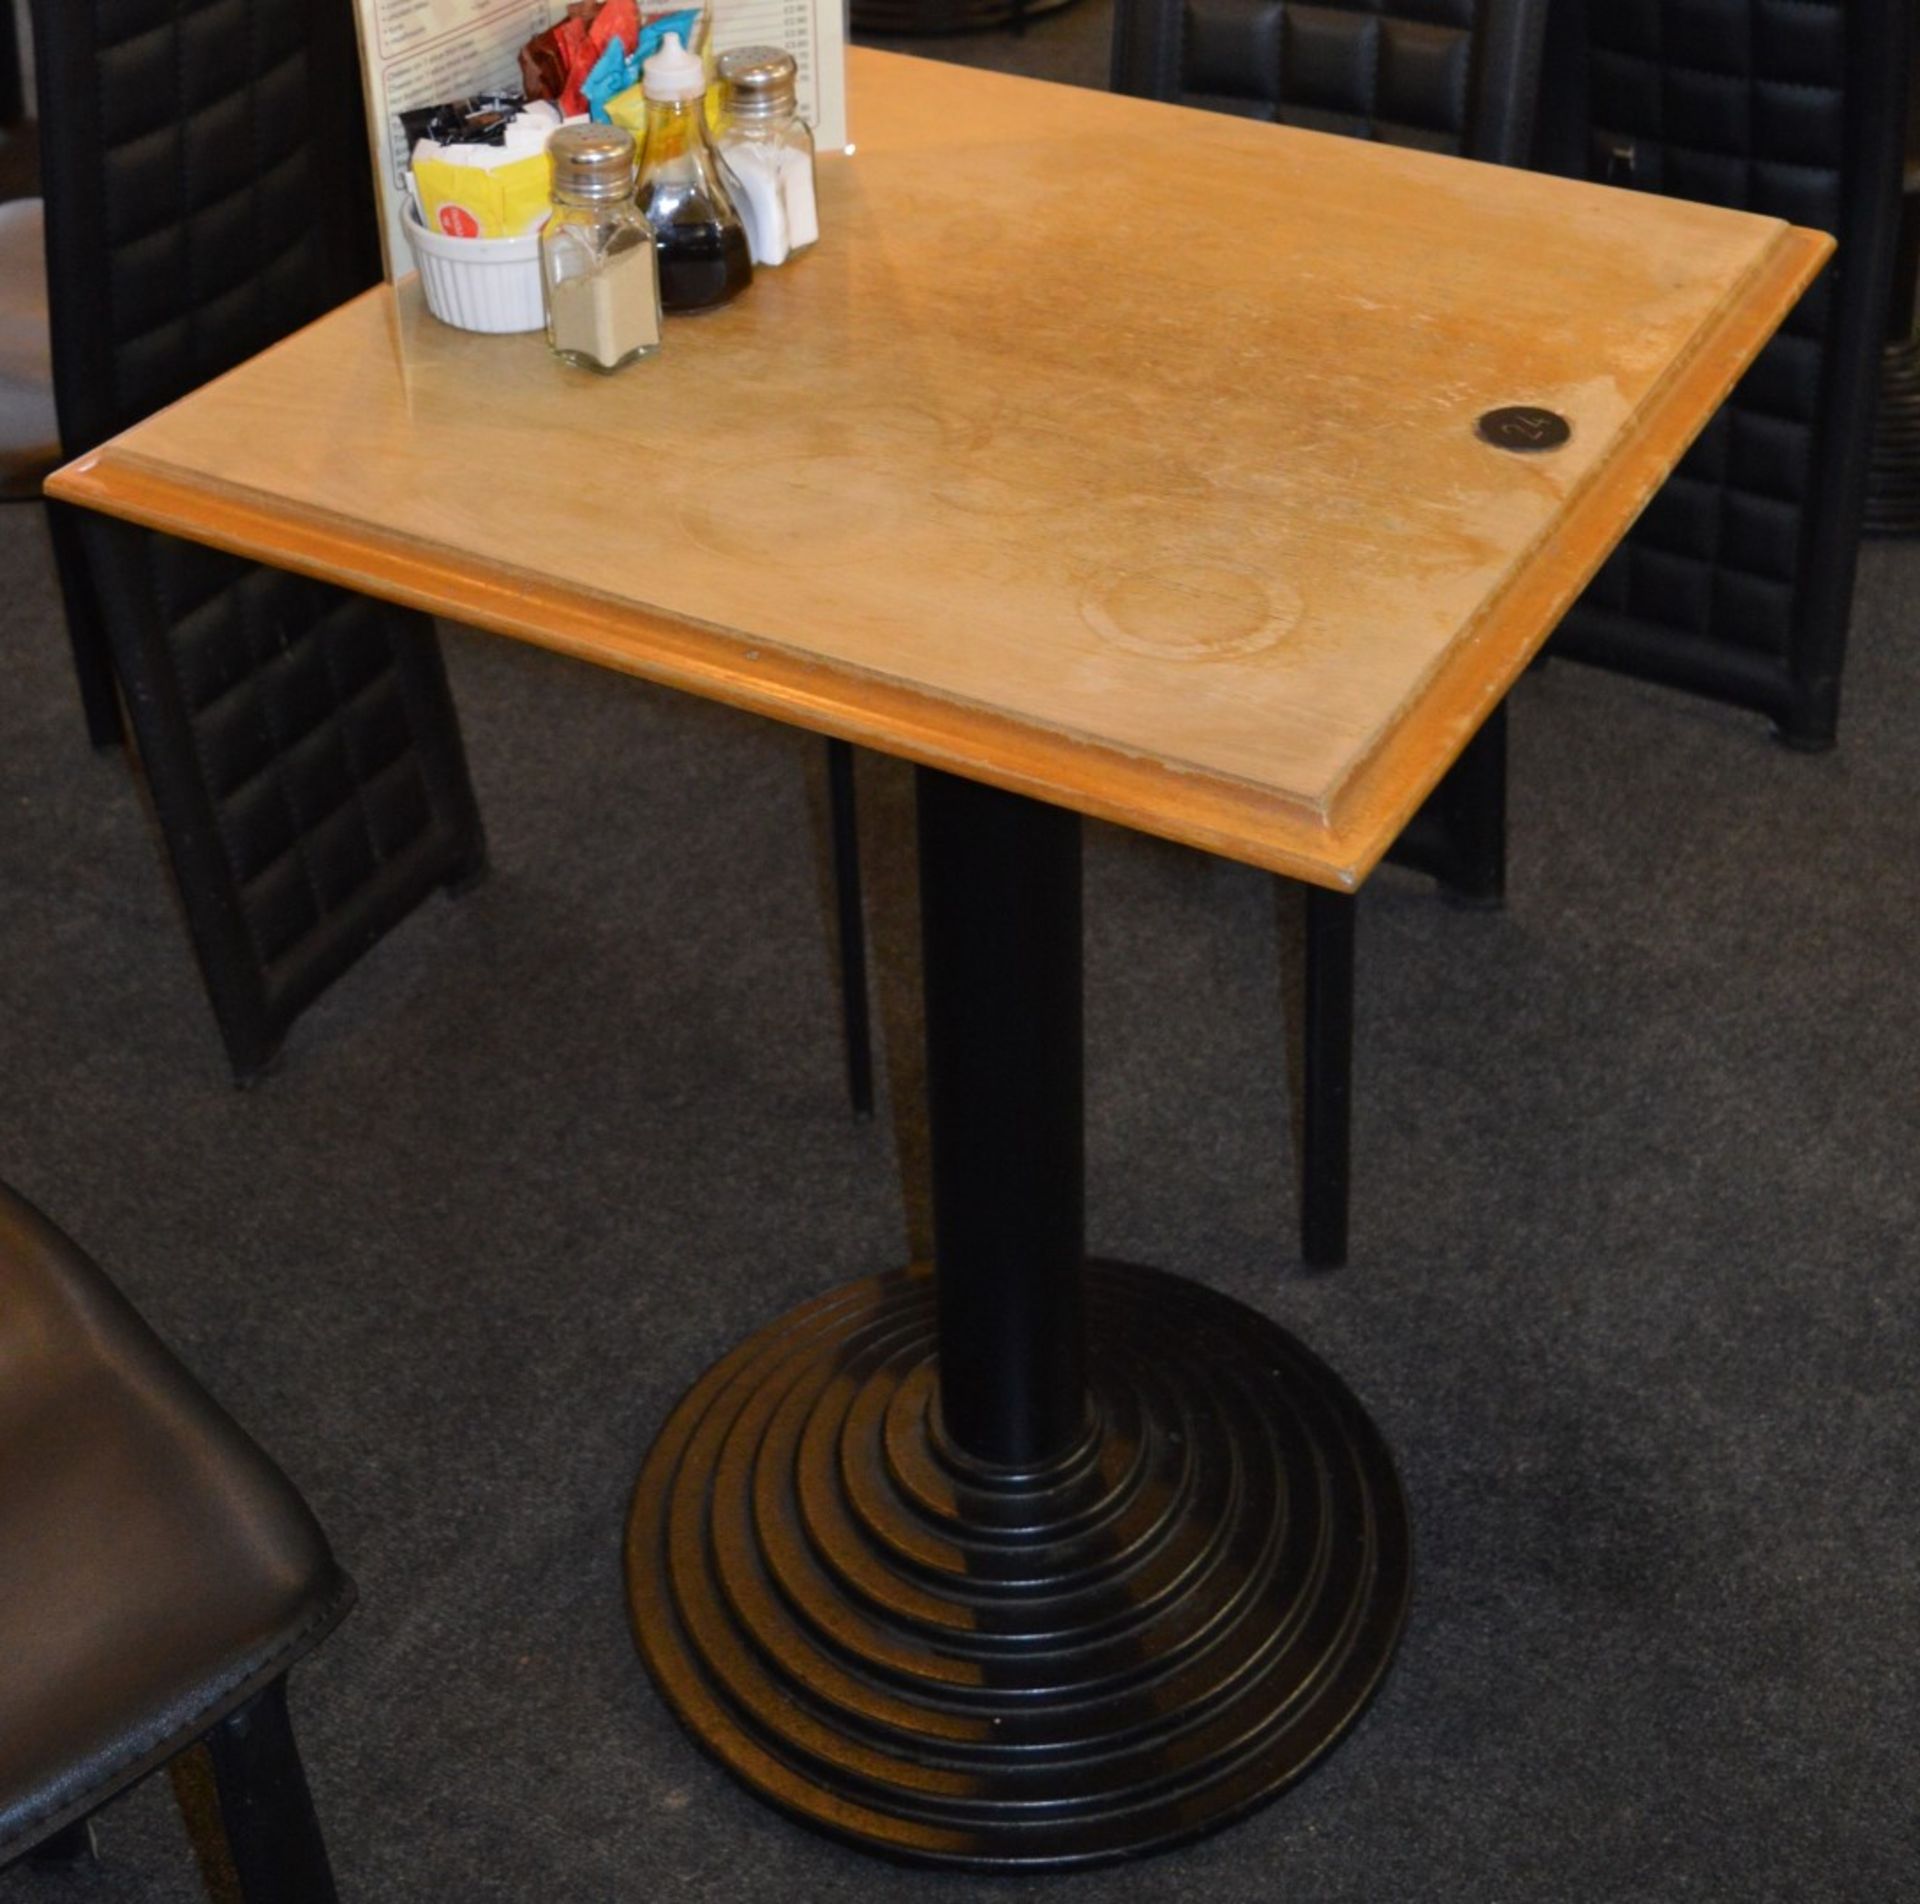 2 x Bistro Tables - Substantial Bases With Light Wooden Tops - Ideal For Coffee Shops, Cafes, - Image 2 of 5